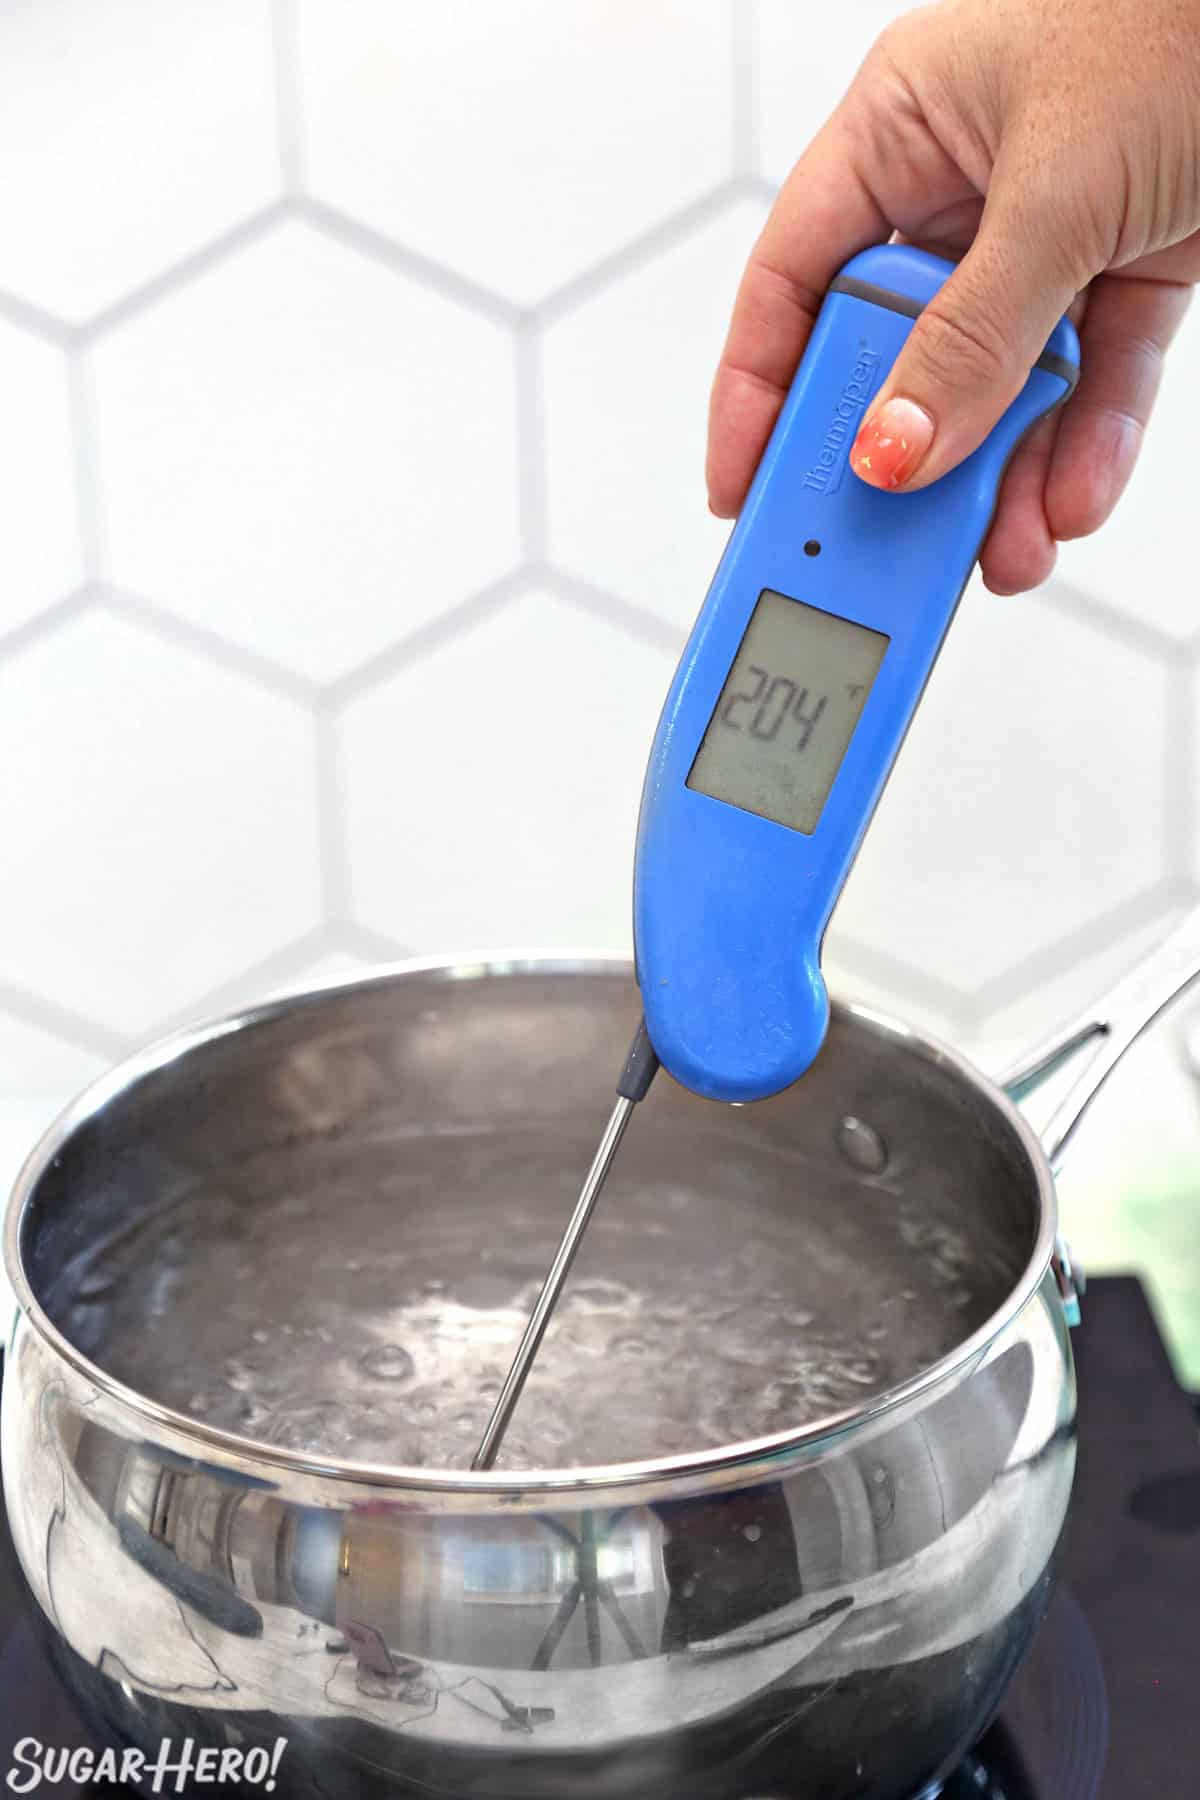 https://www.sugarhero.com/wp-content/uploads/2023/02/how-to-use-a-candy-thermometer-5.jpg